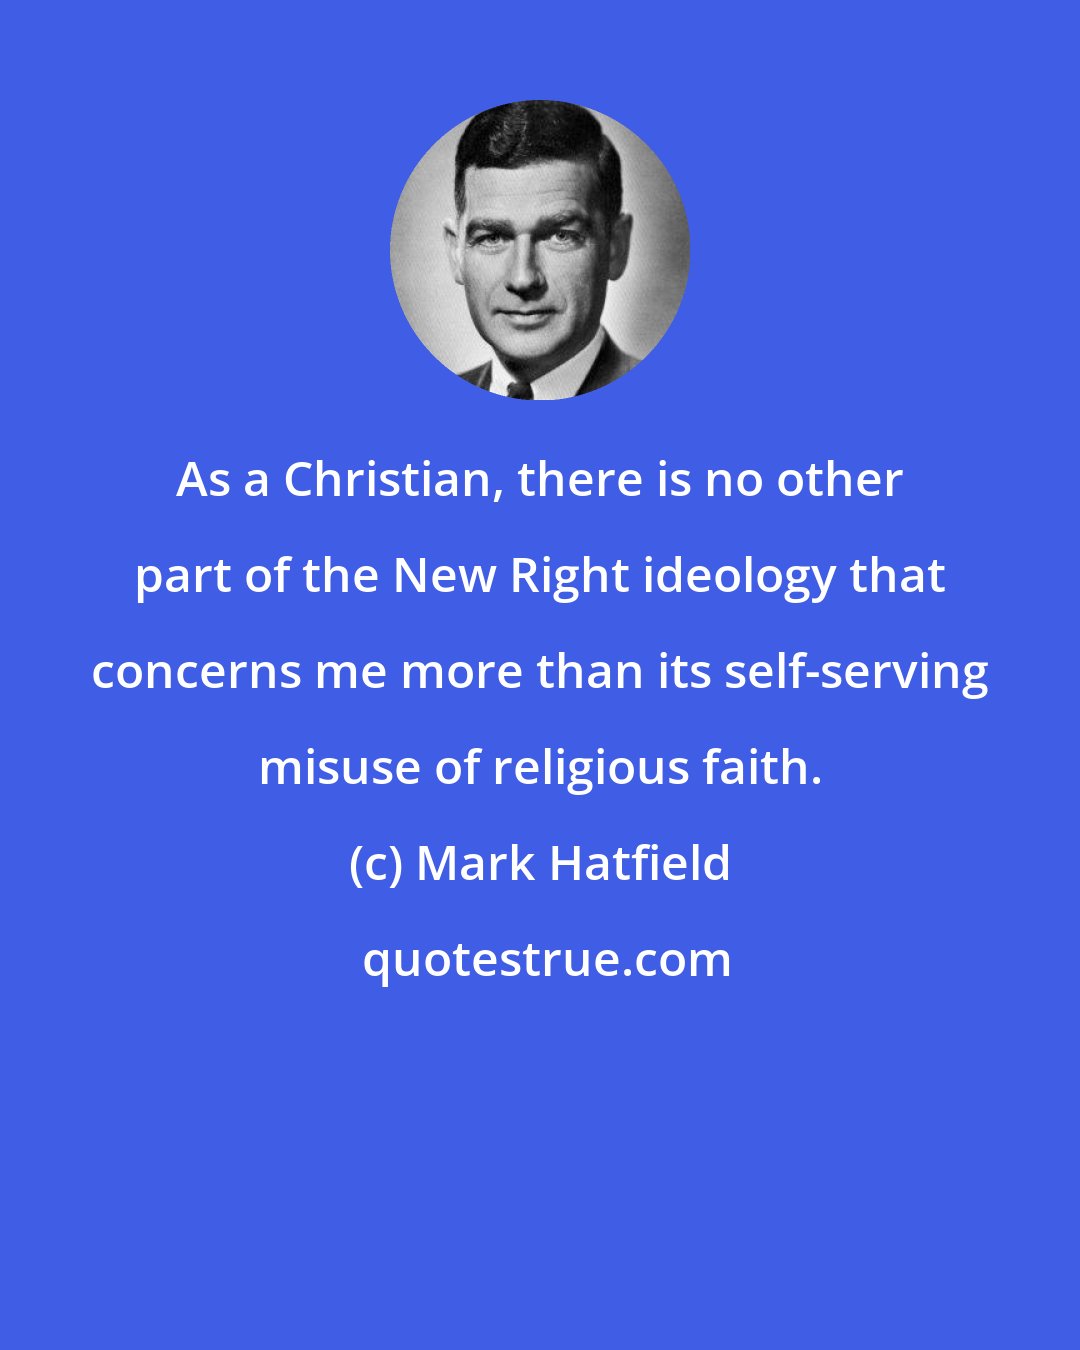 Mark Hatfield: As a Christian, there is no other part of the New Right ideology that concerns me more than its self-serving misuse of religious faith.